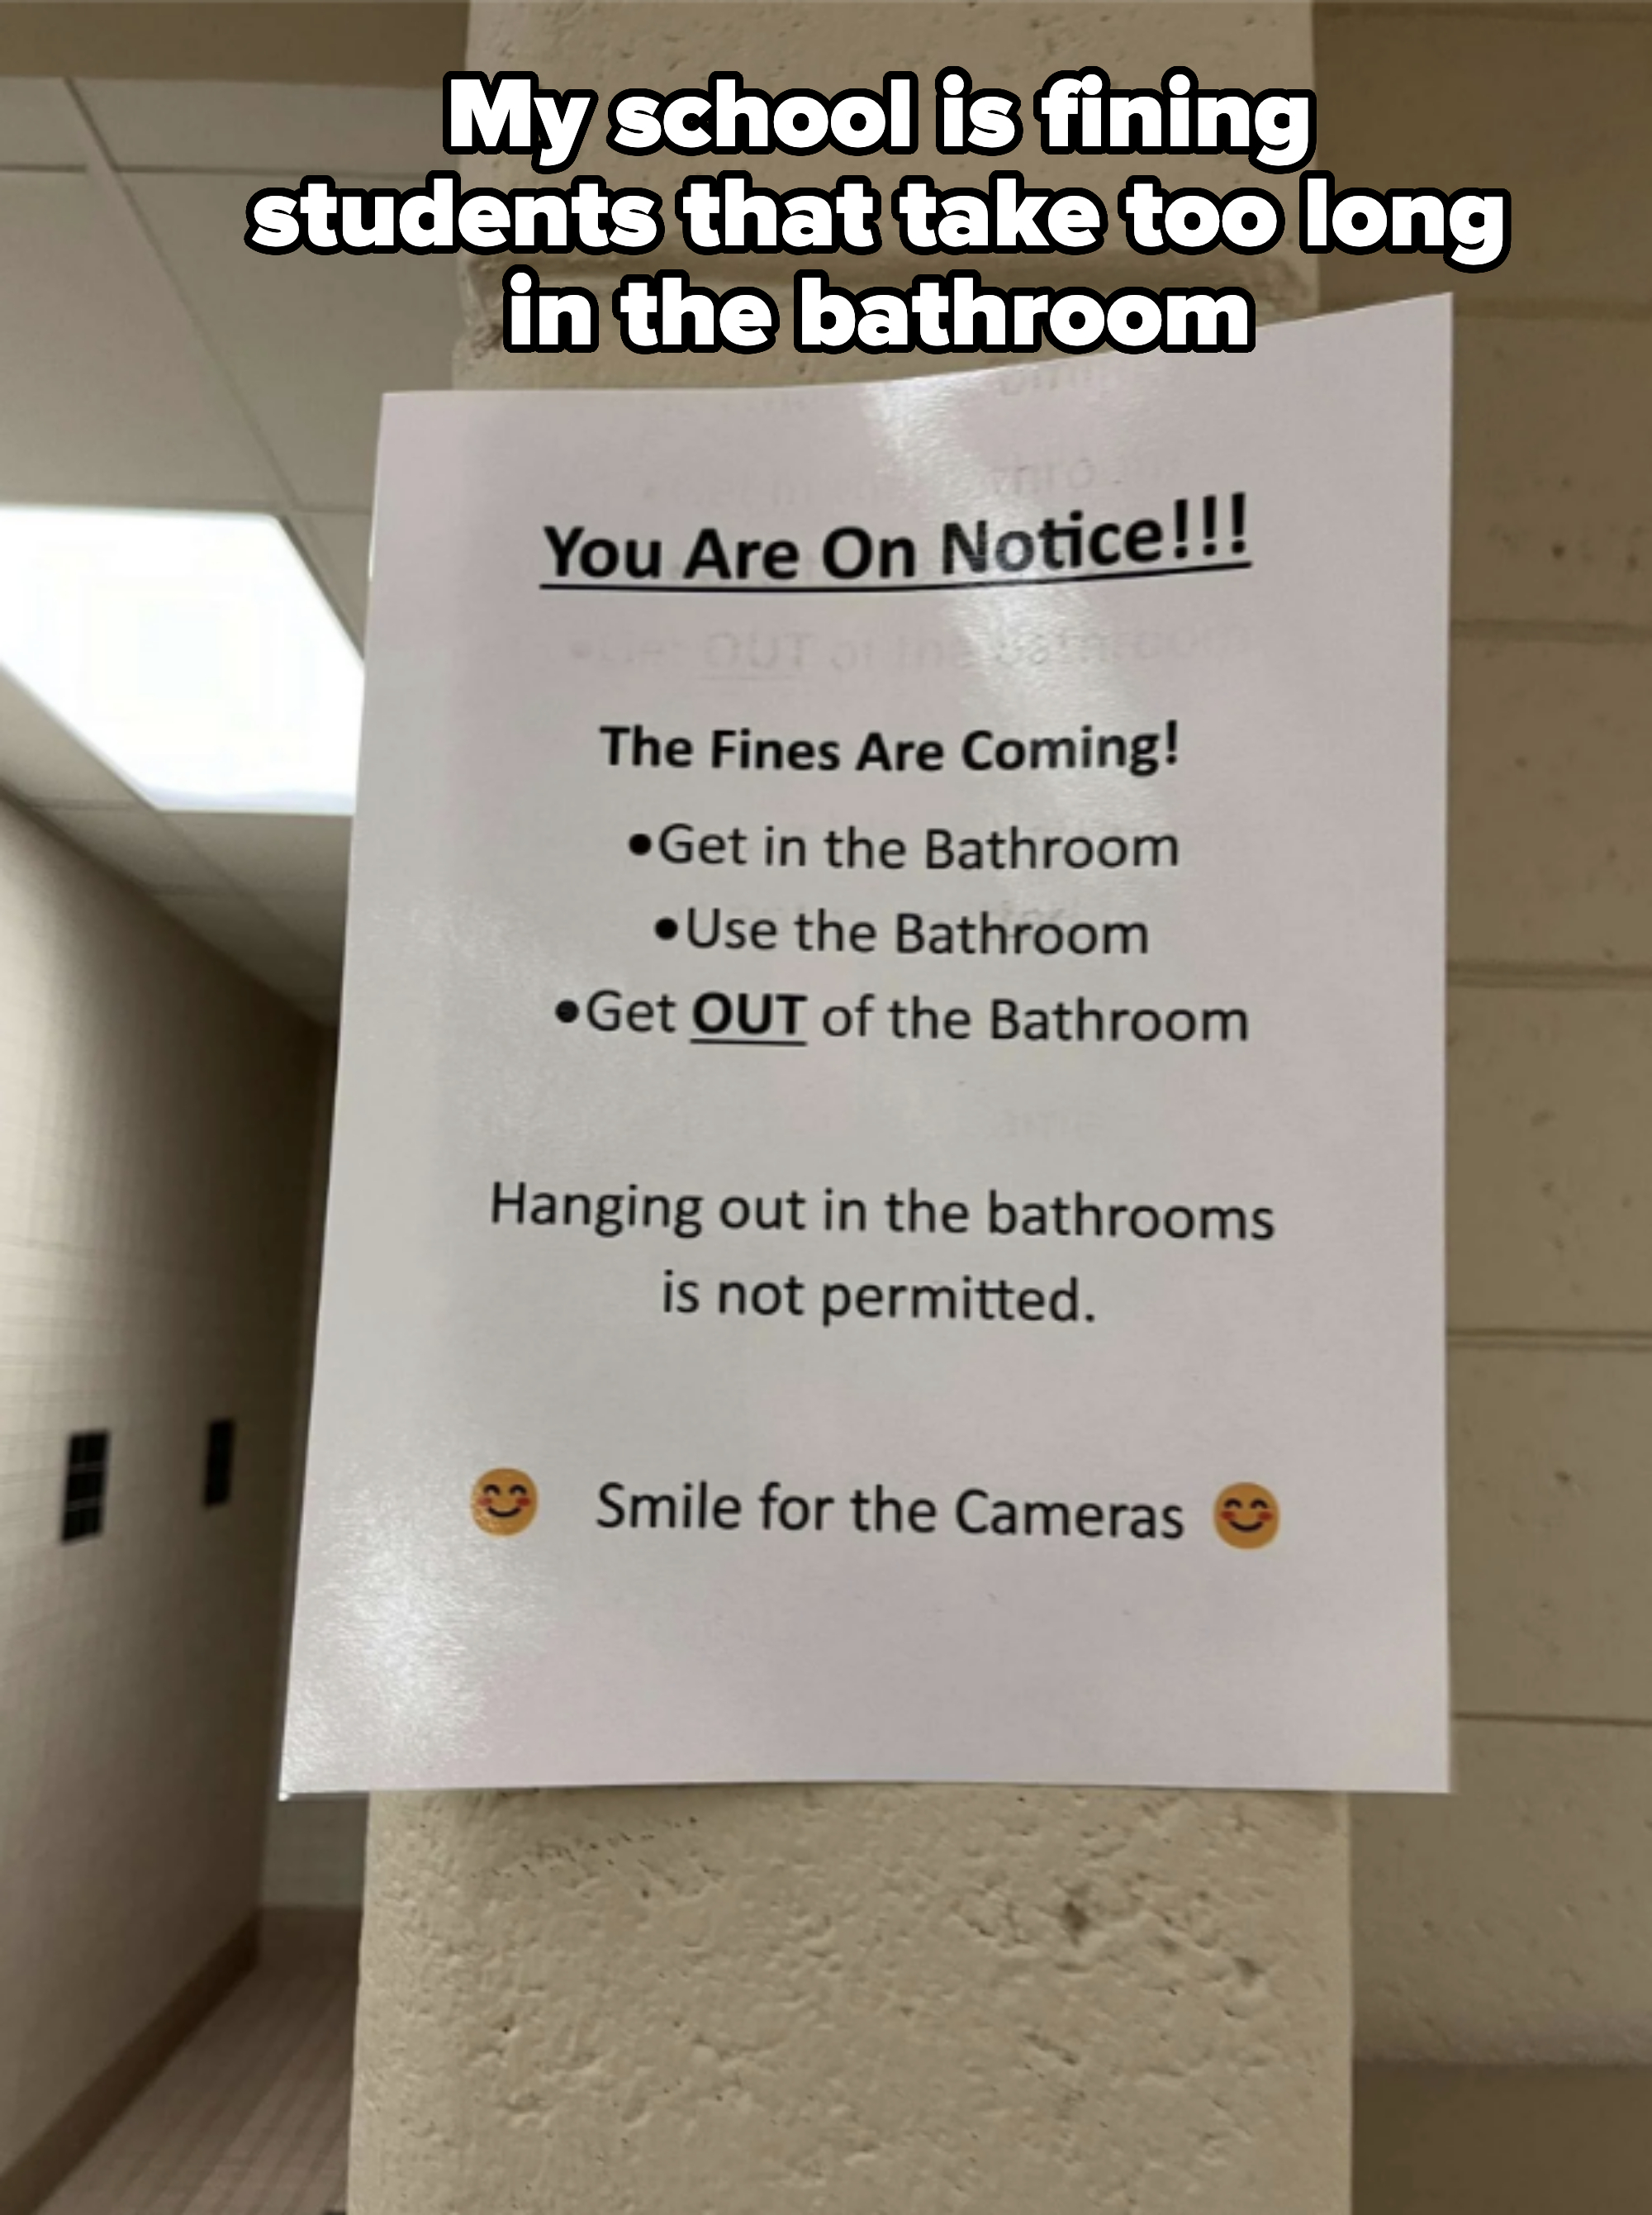 A notice posted on a wall stating: &quot;You Are On Notice!!! The Fines Are Coming! Get in the bathroom, use the bathroom, get out of the bathroom. Hanging out in the bathrooms is not permitted. Smile for the cameras.&quot;